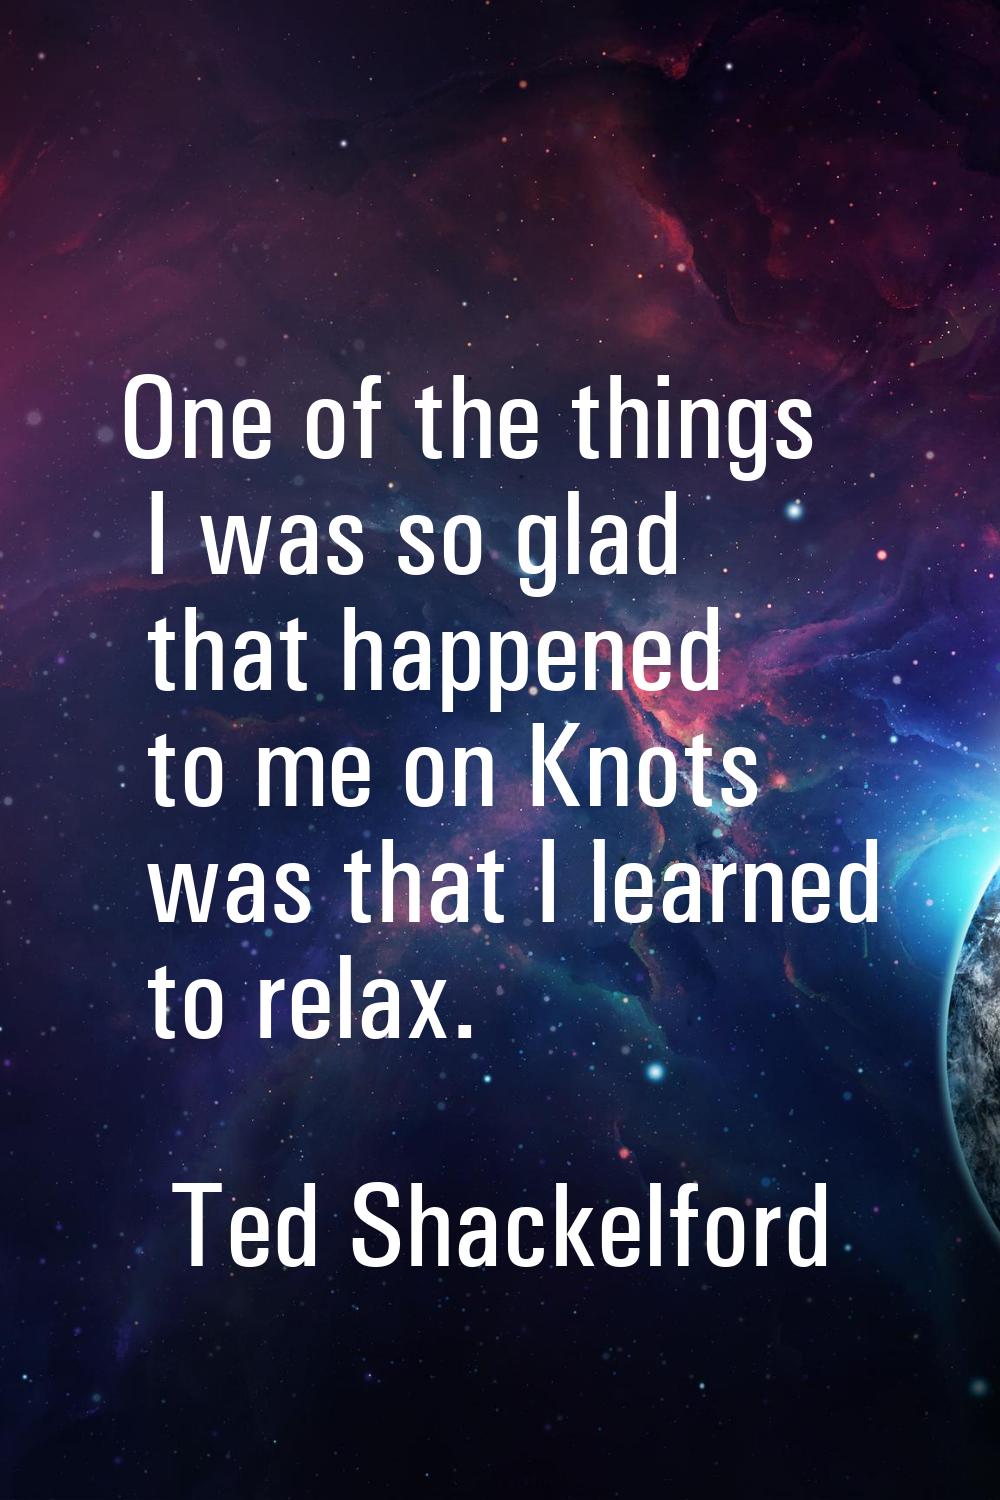 One of the things I was so glad that happened to me on Knots was that I learned to relax.